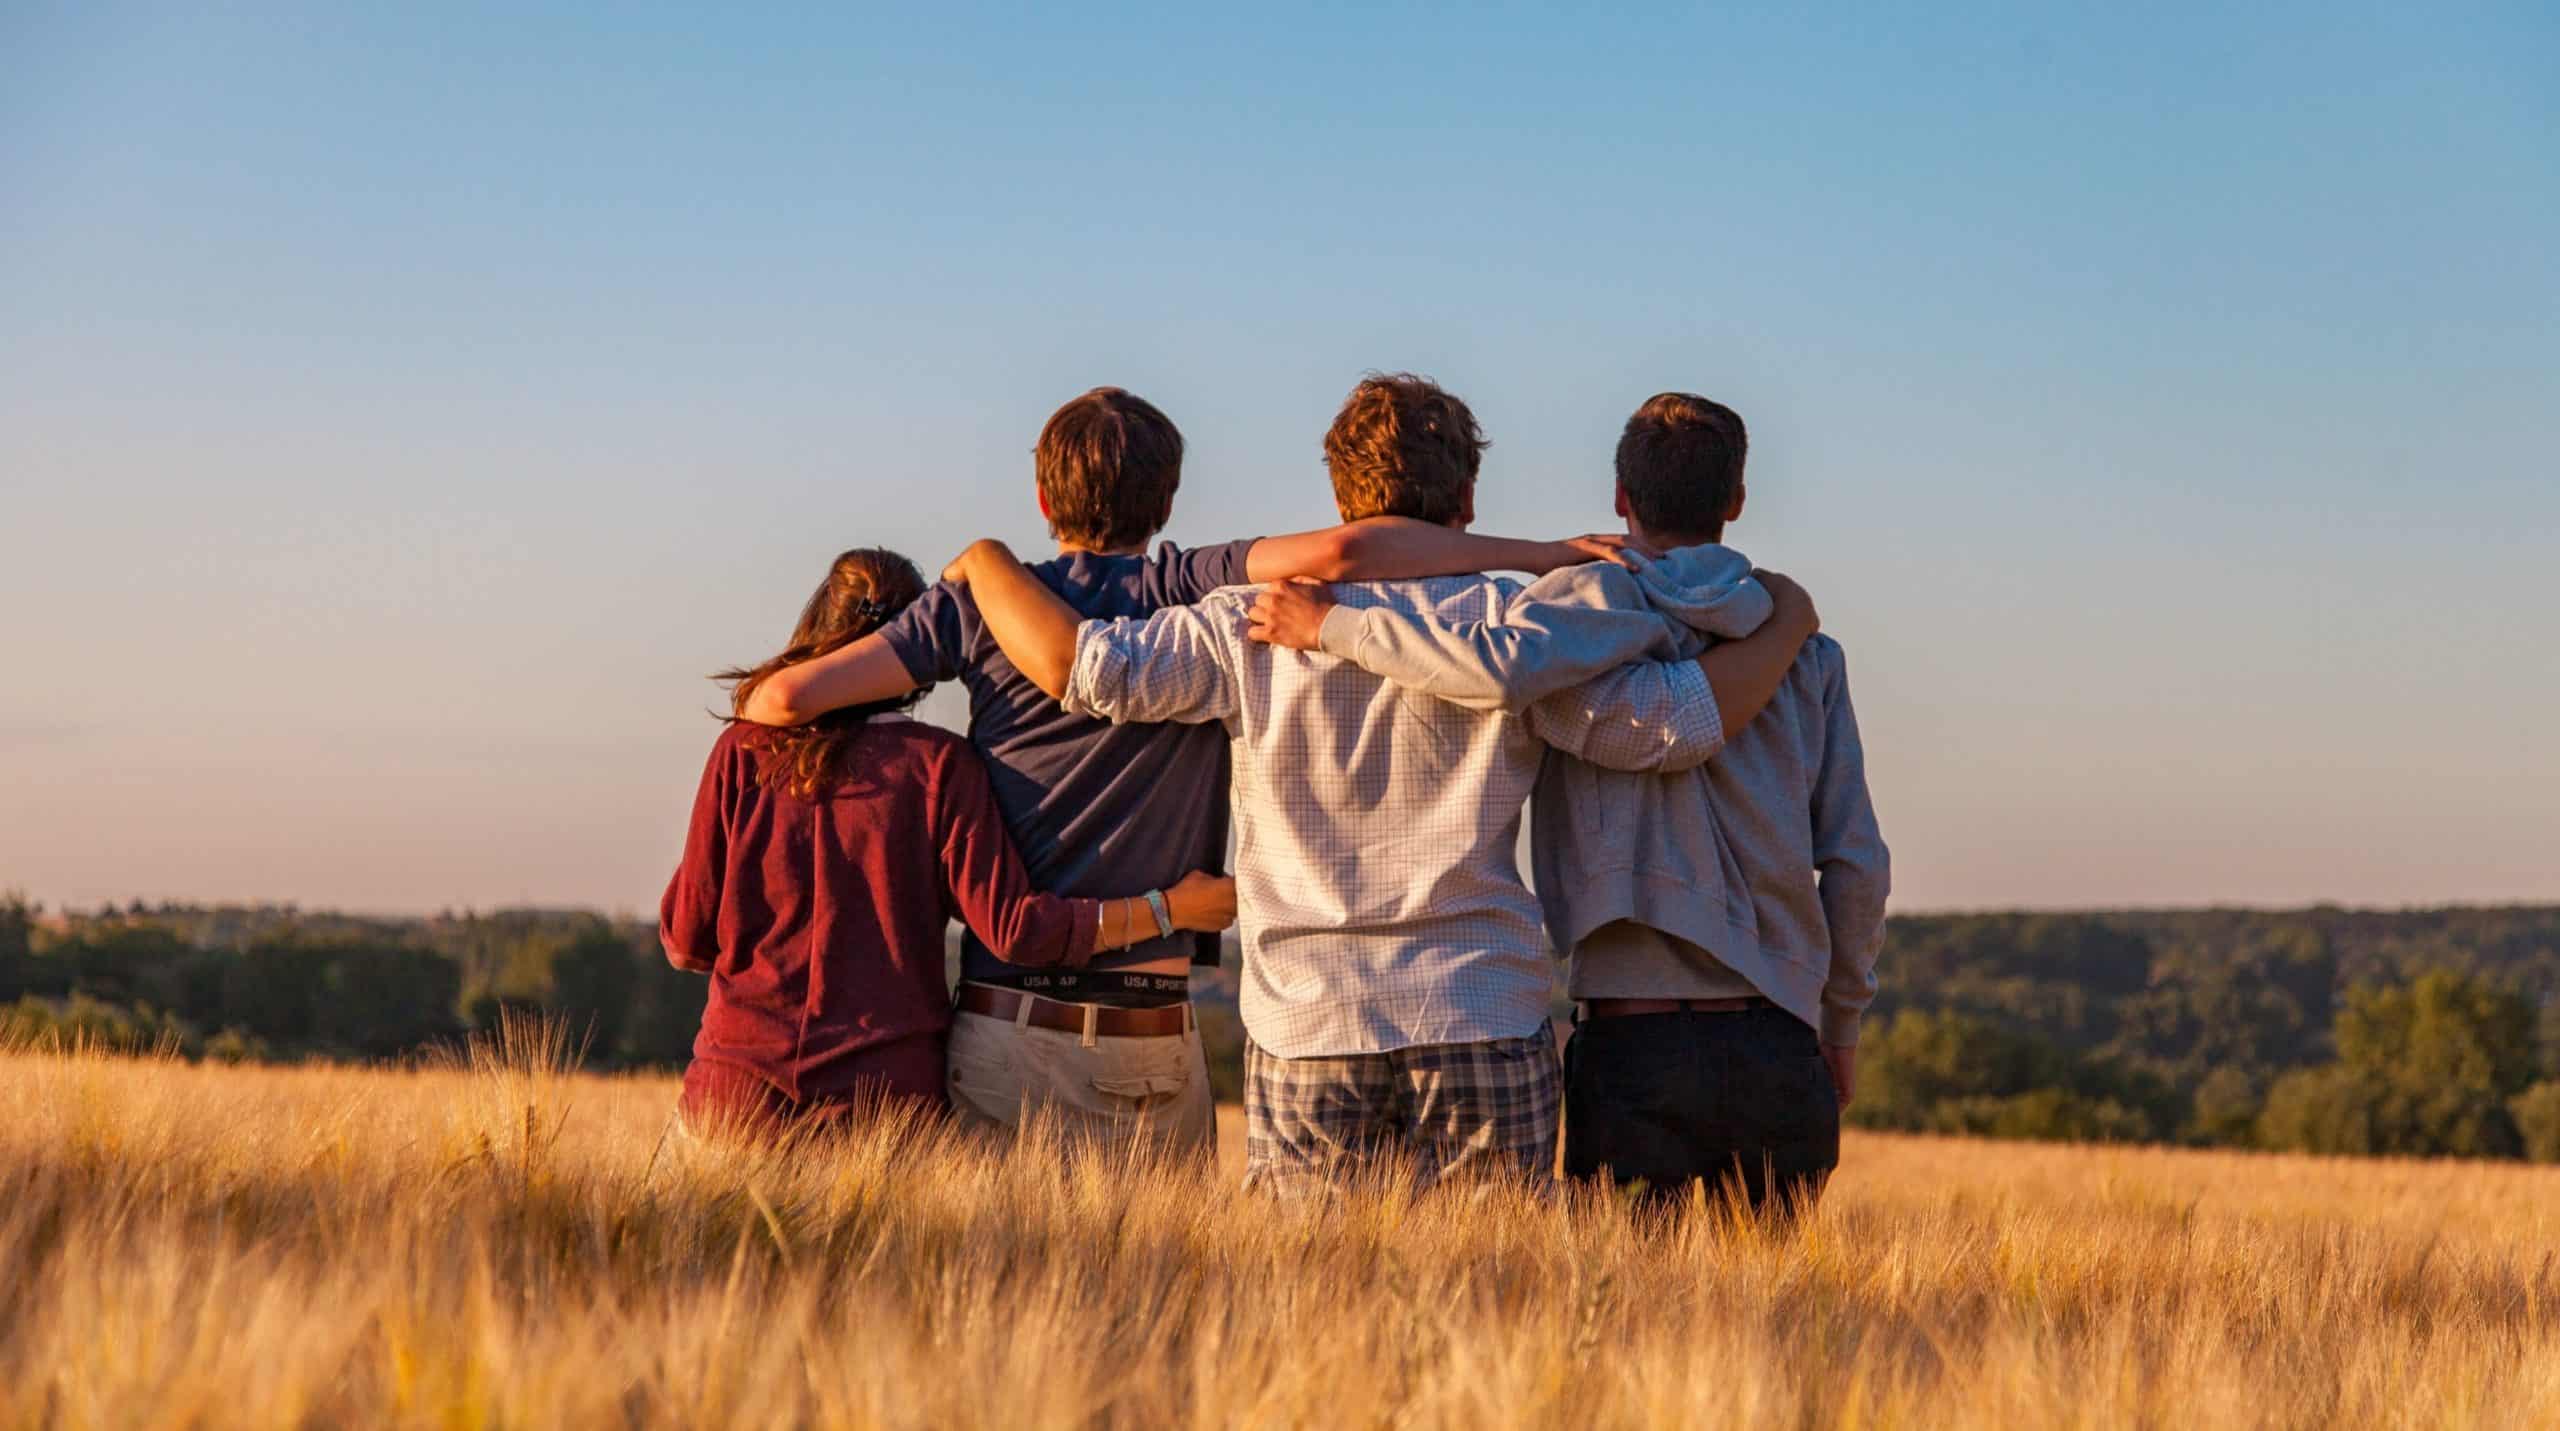 Shown from behind, four young people standing in a wheat field with their arms around each other's shoulders